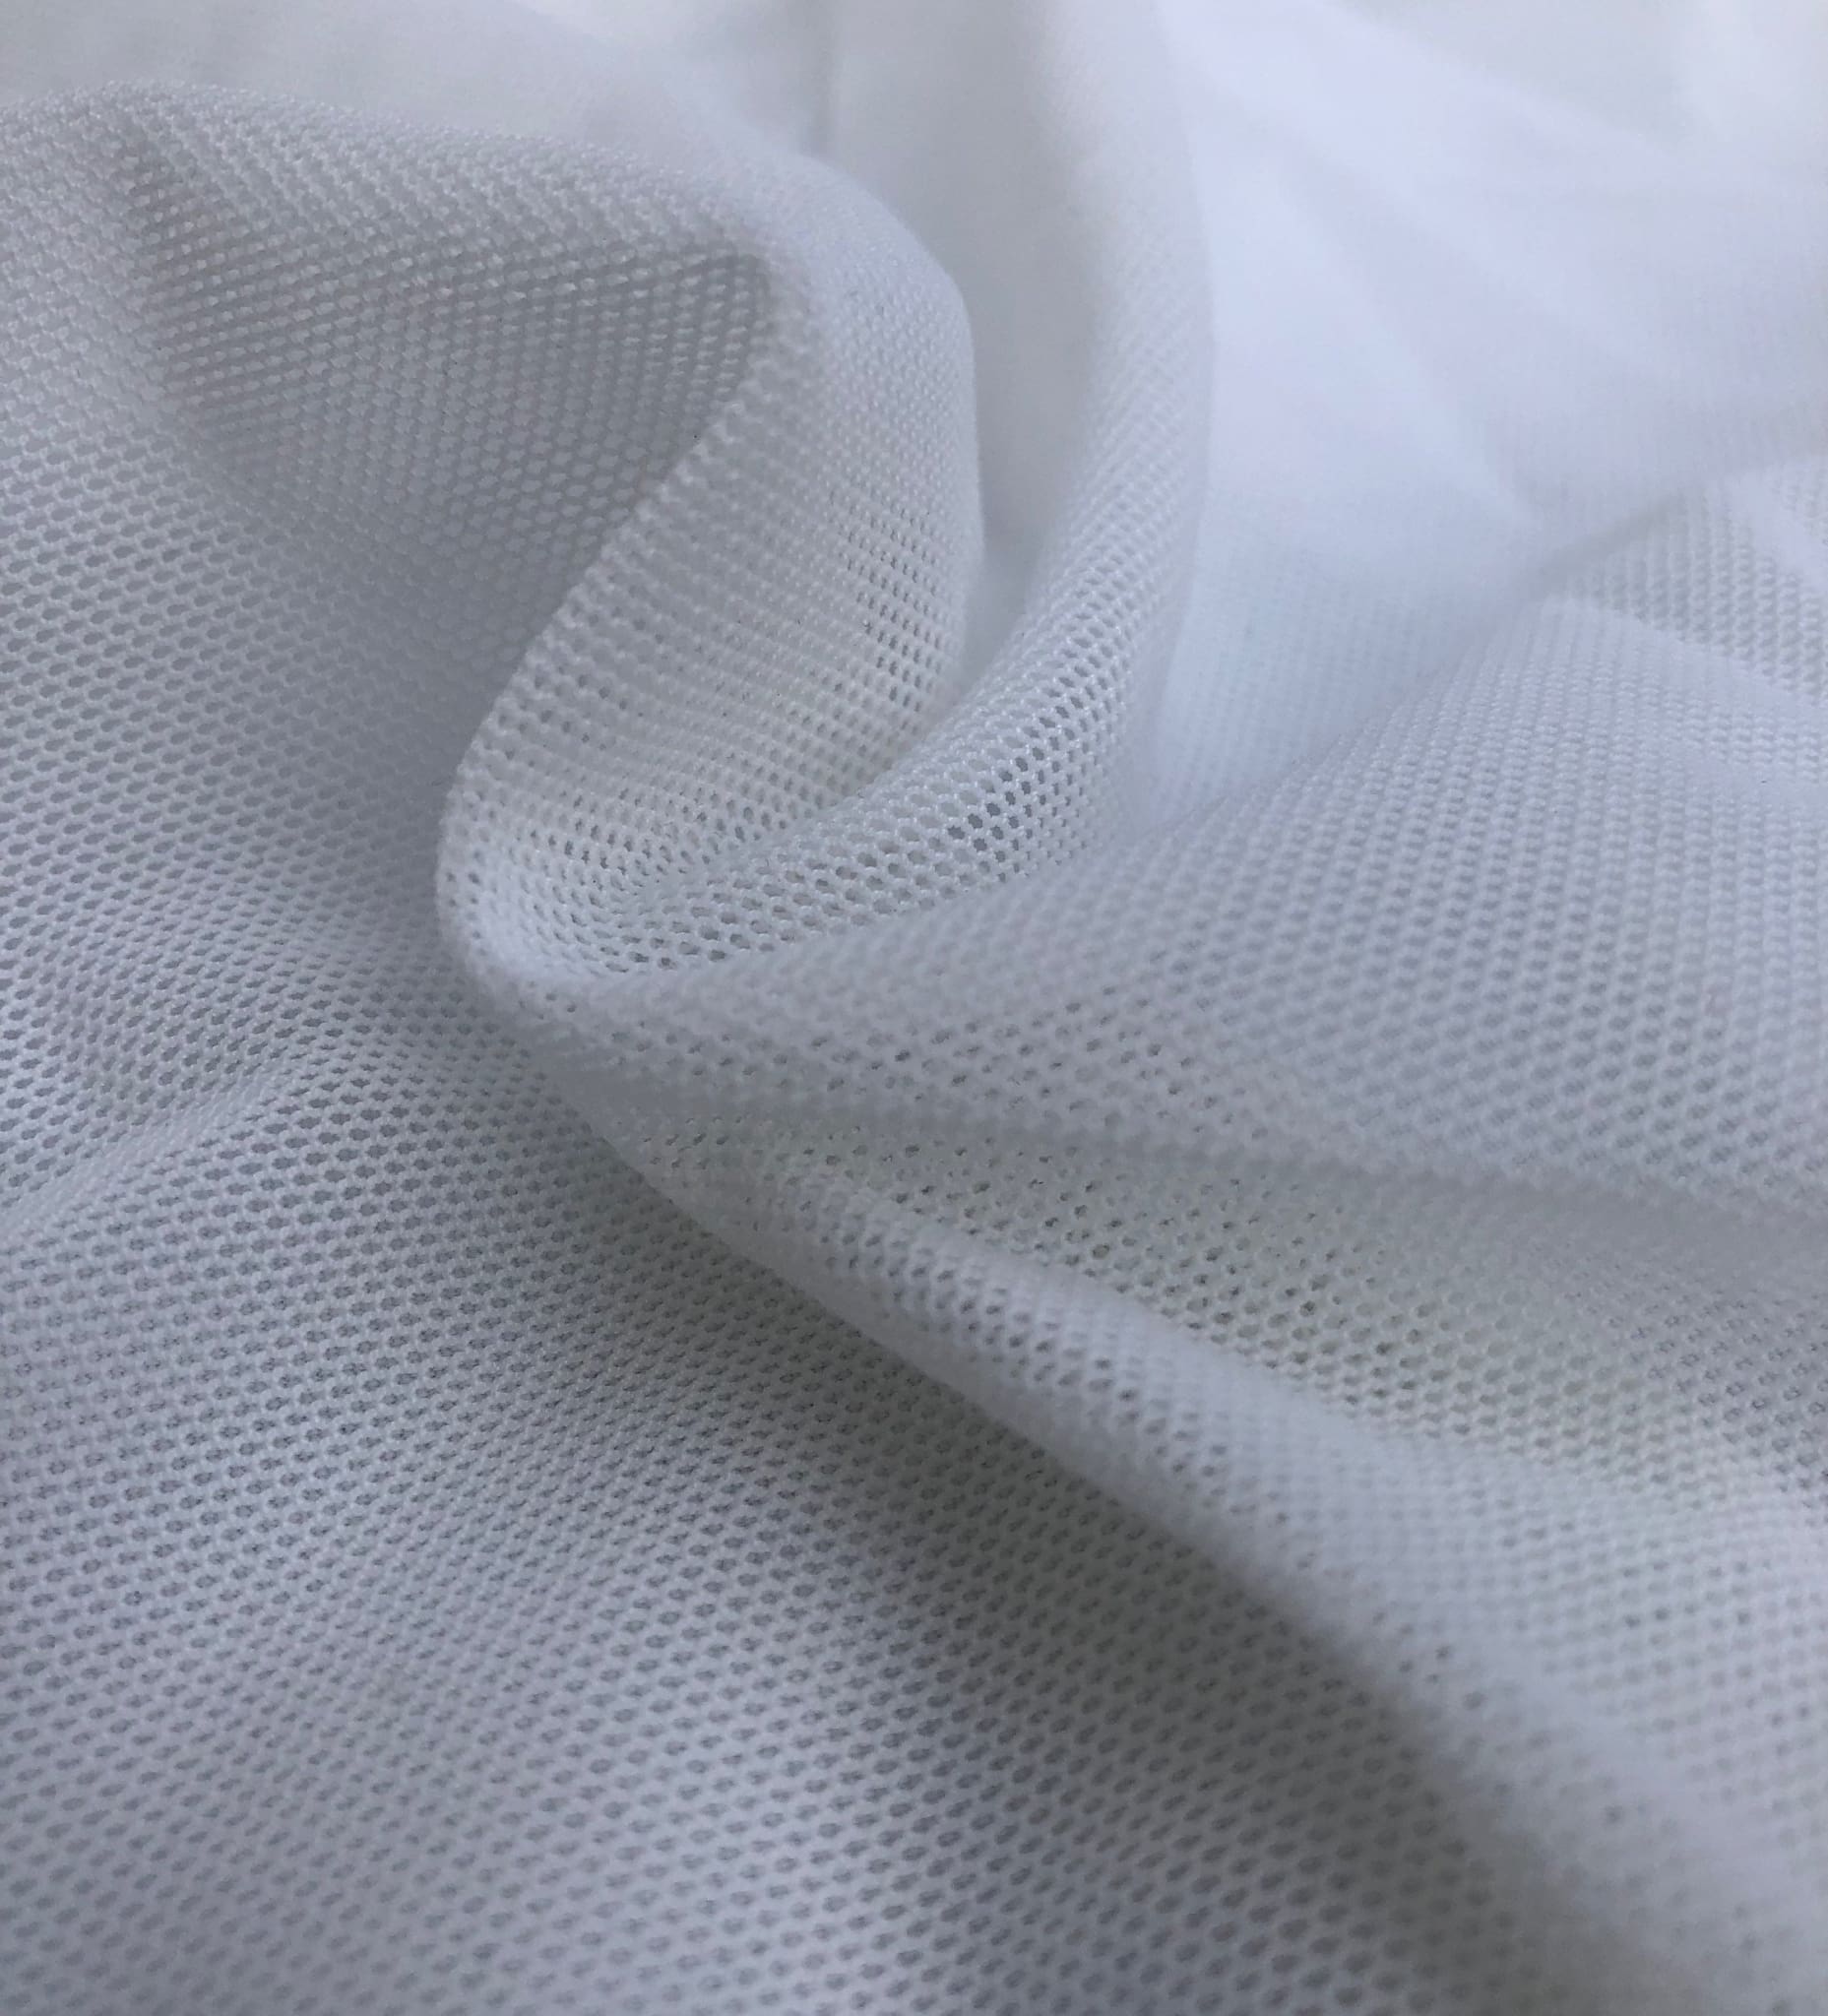 Spandex Fabric Metallic White / 60 Wide/Sold by The Yard